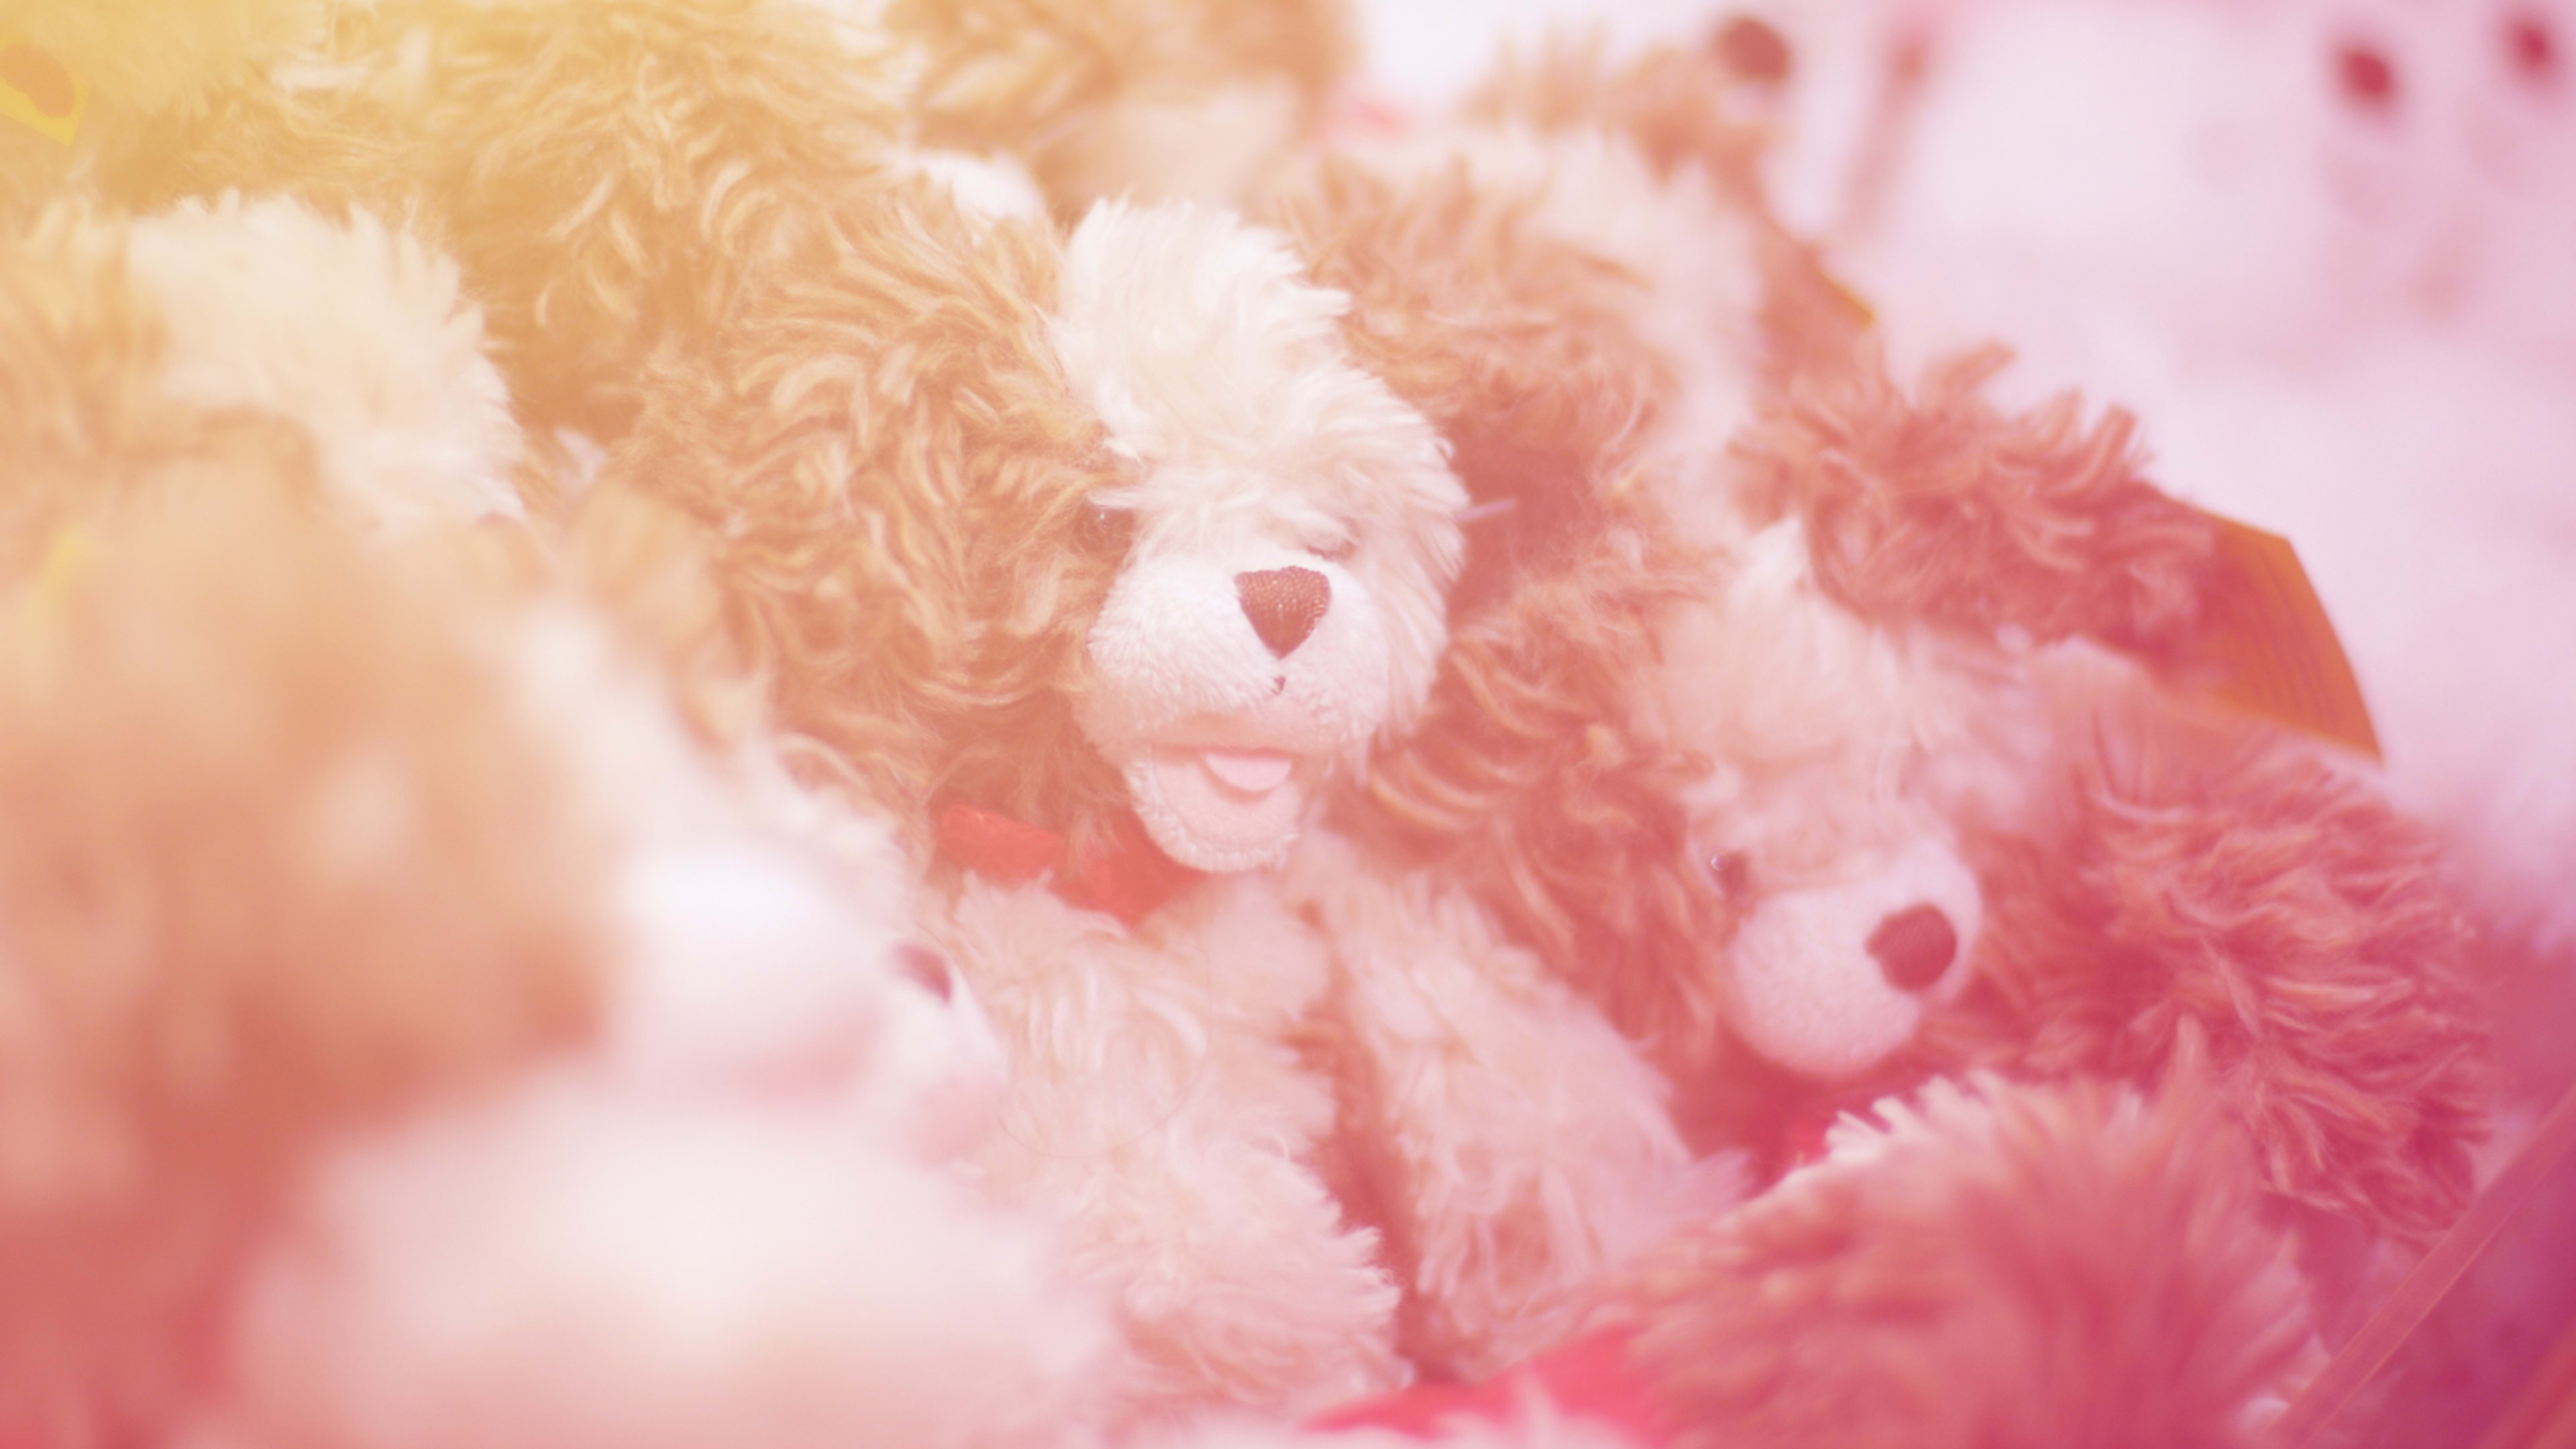 Build-A-Bear gave fans exactly what they wanted, and it backfired spectacularly